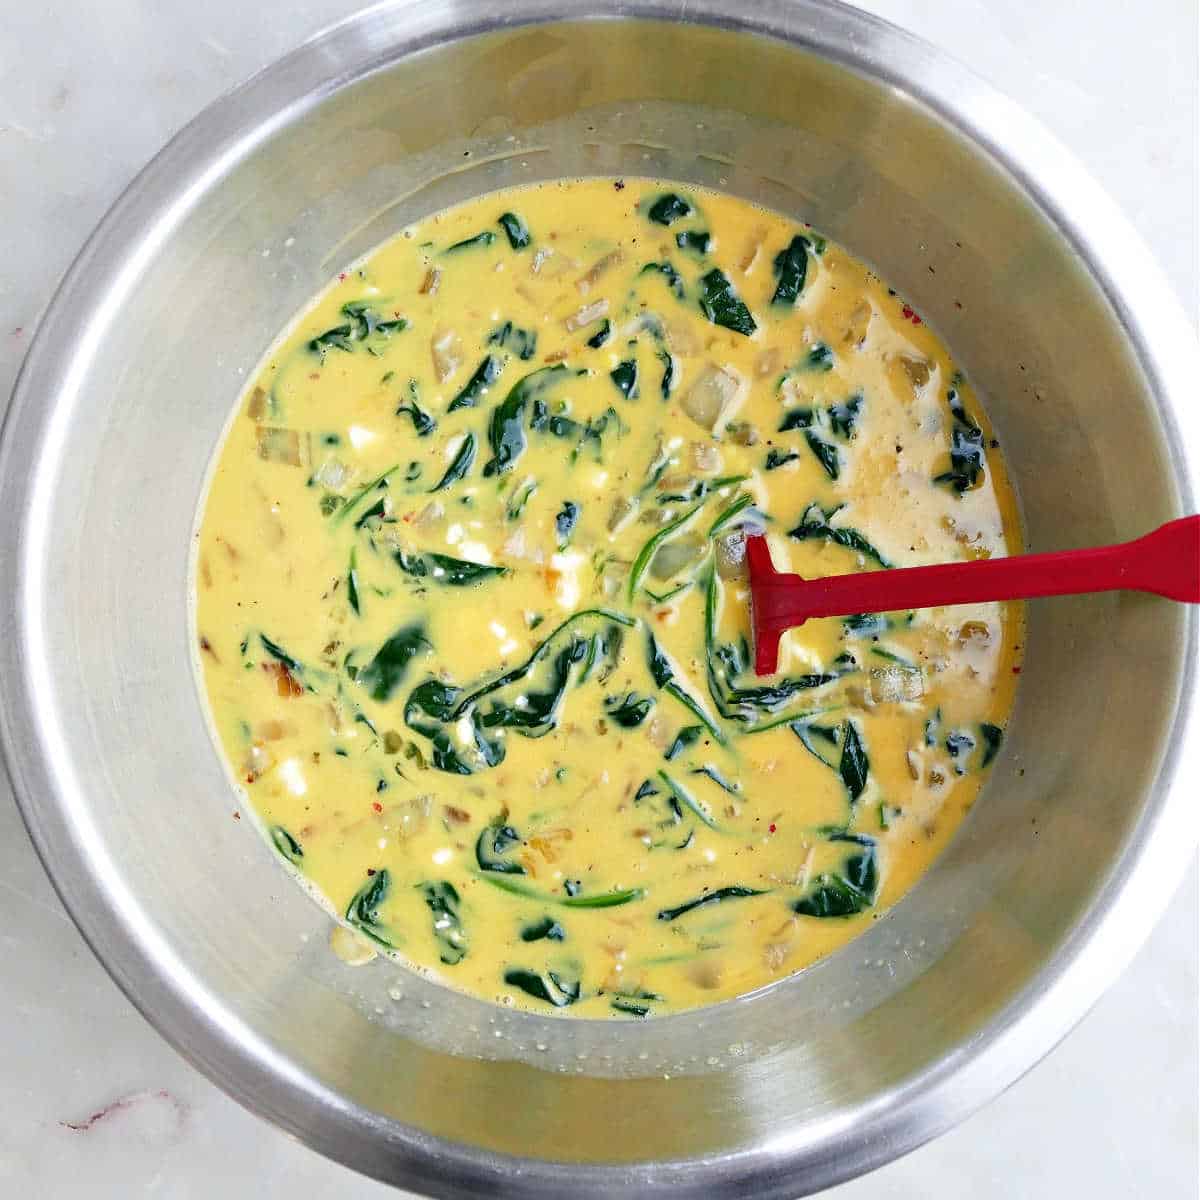 Whisked eggs in a mixing bowl with spinach.